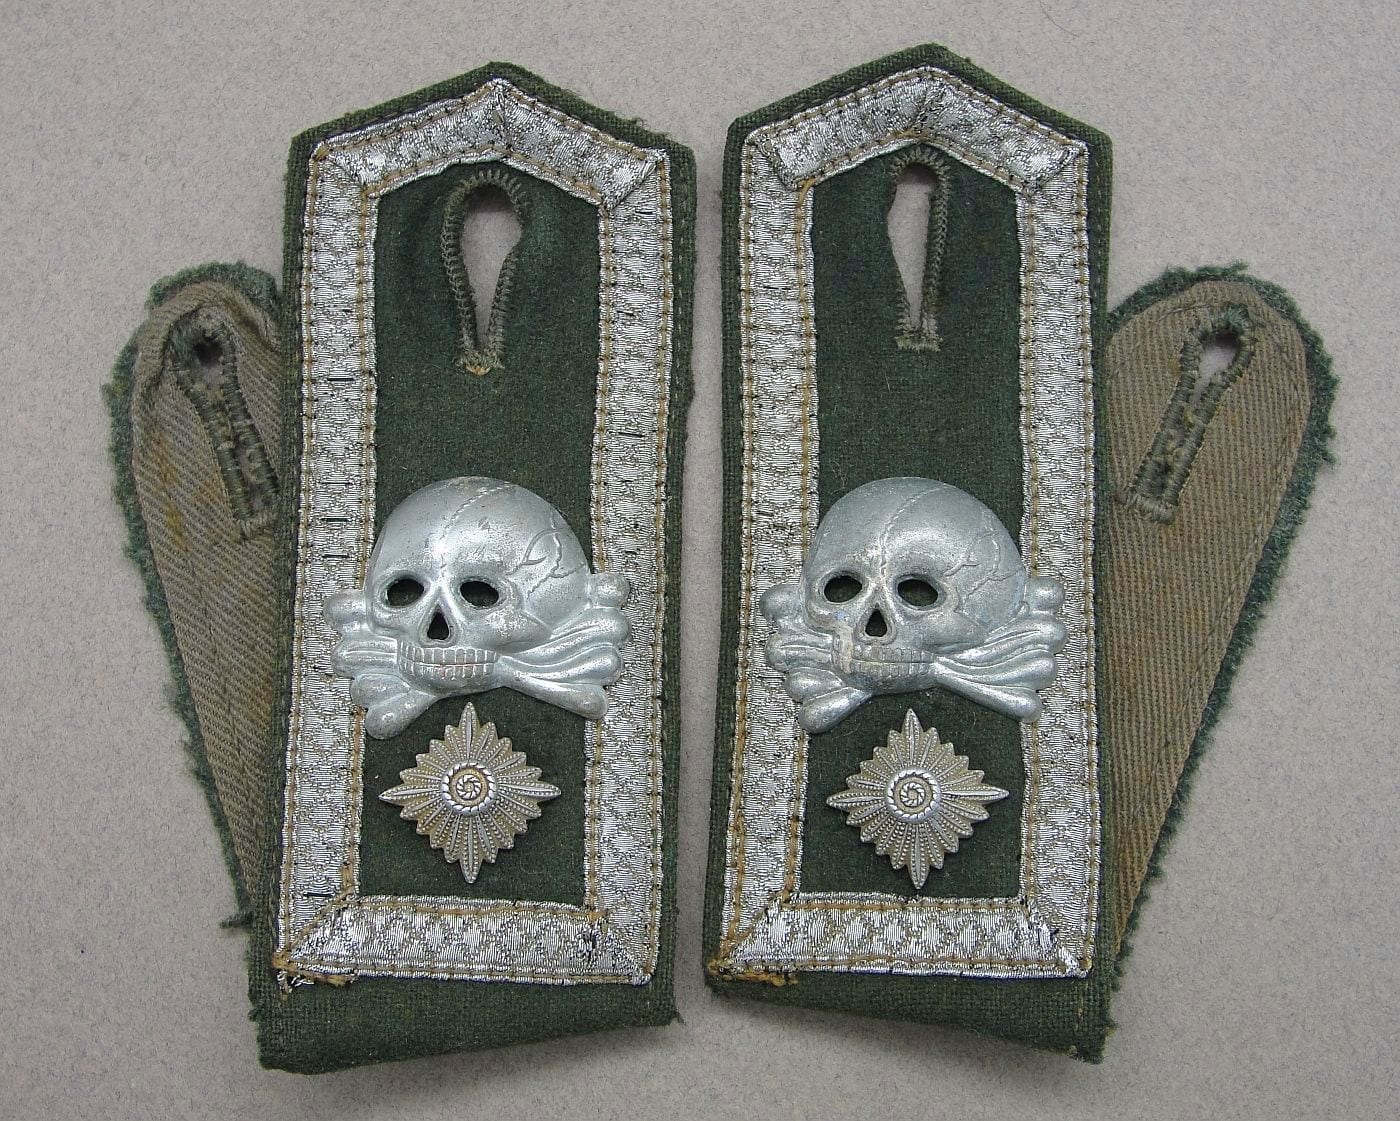 5th Cavalry Regiment Shoulder Boards with Over-sized Army/SS Cap Pattern Skulls